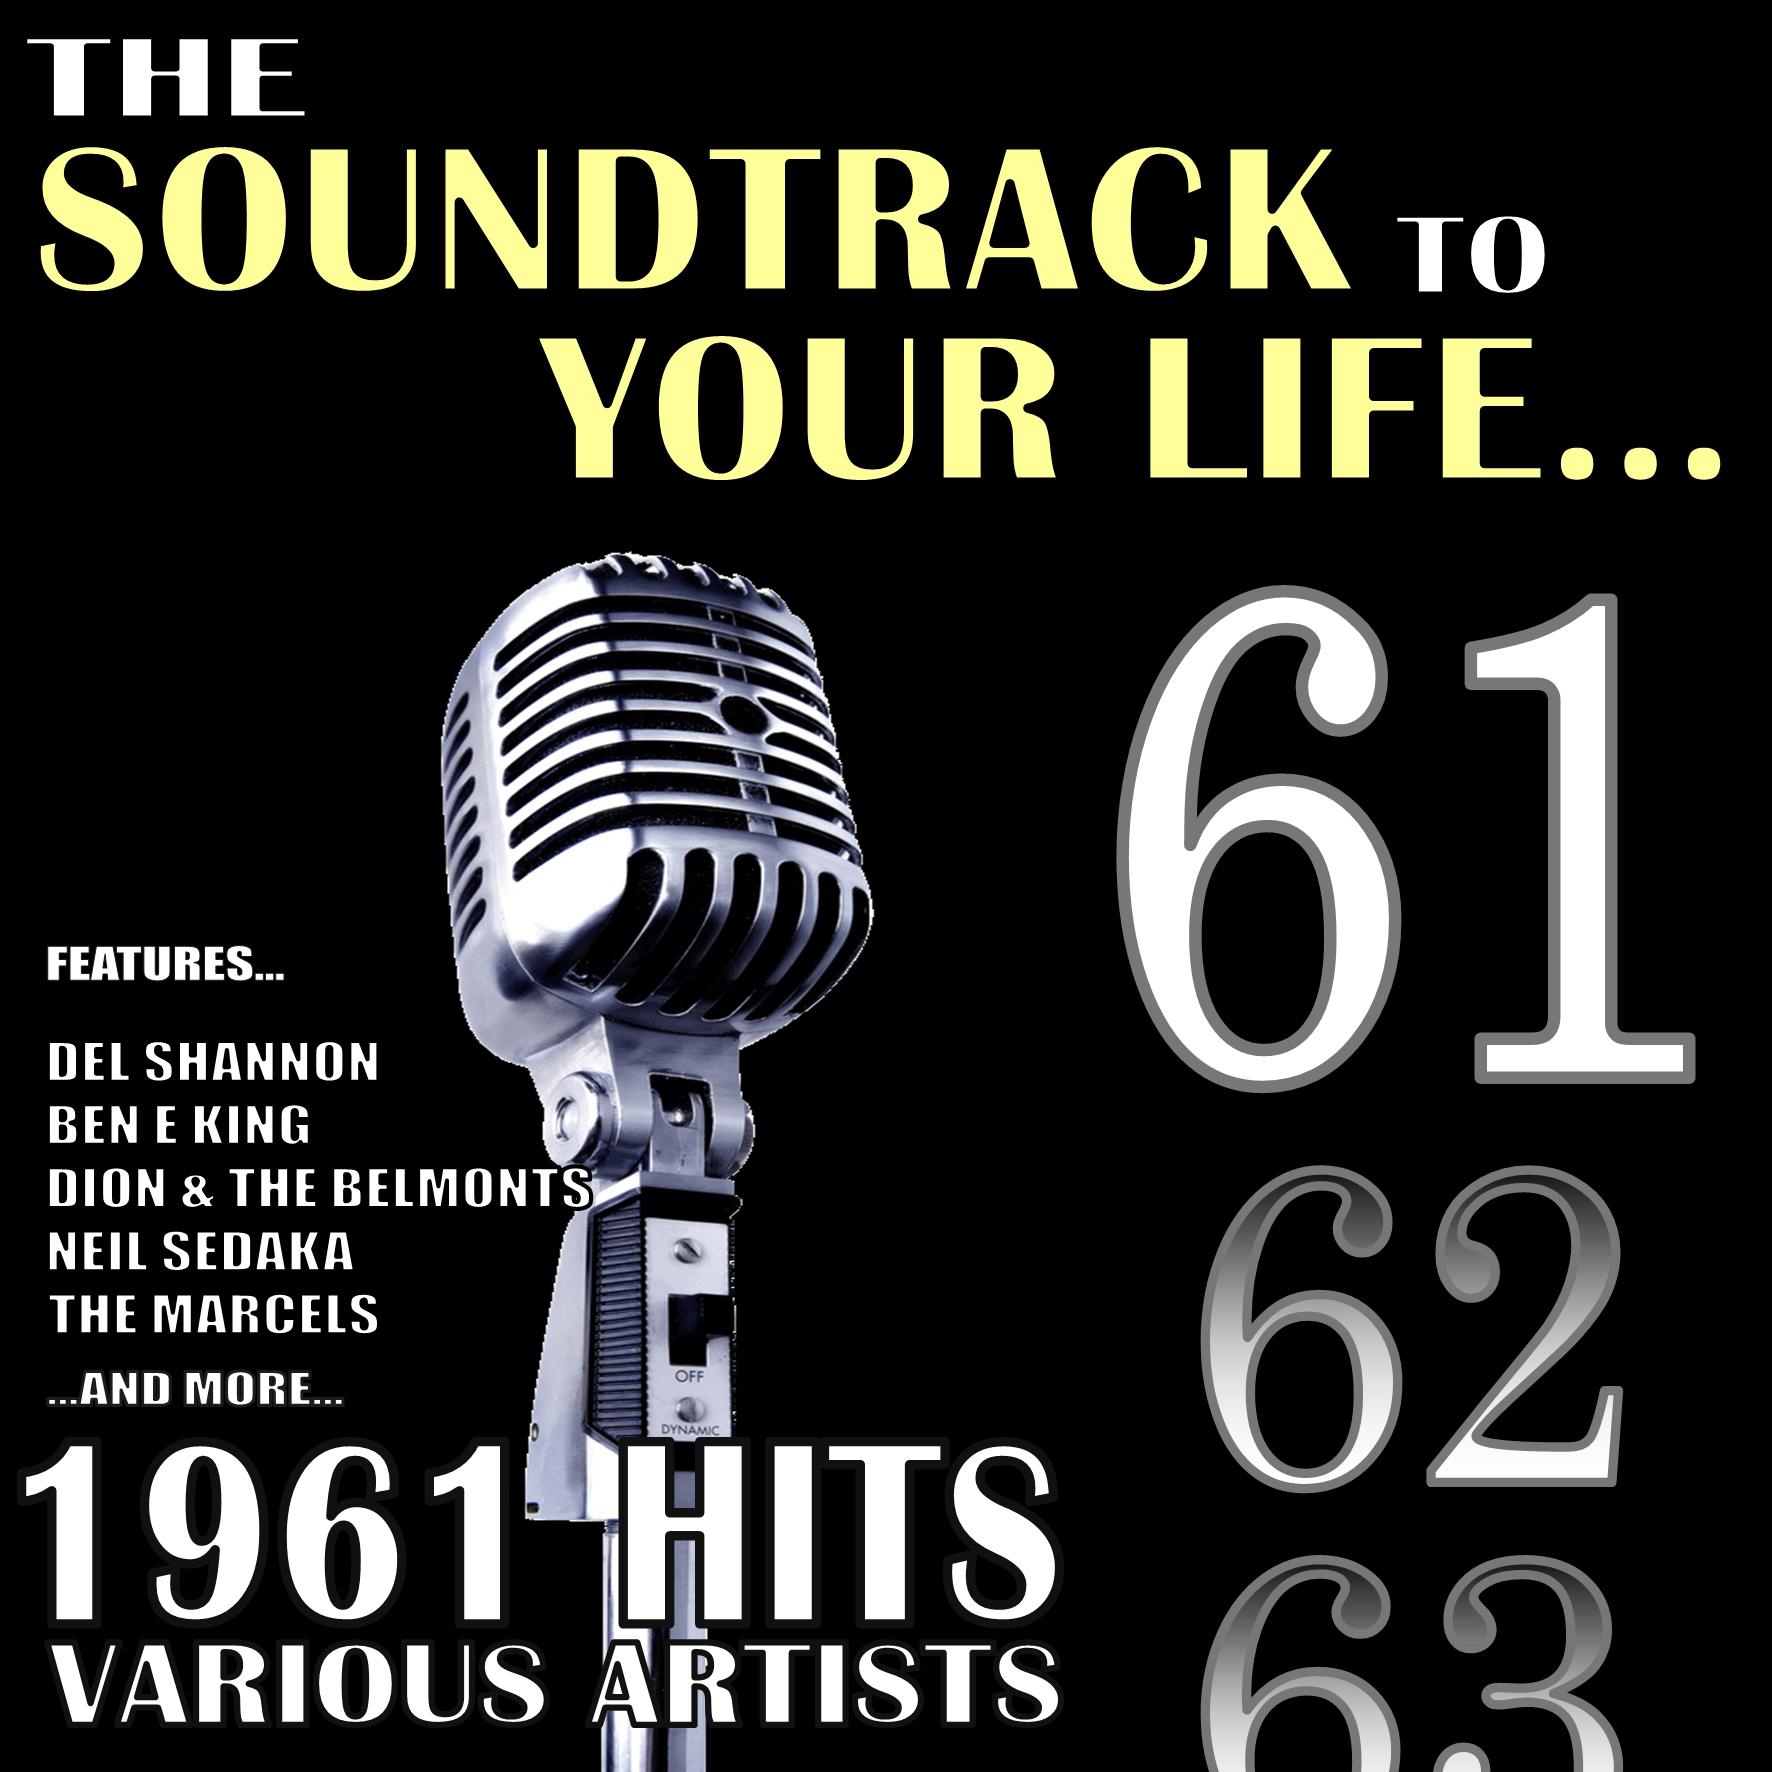 The Soundtrack to Your Life:1961 Hits